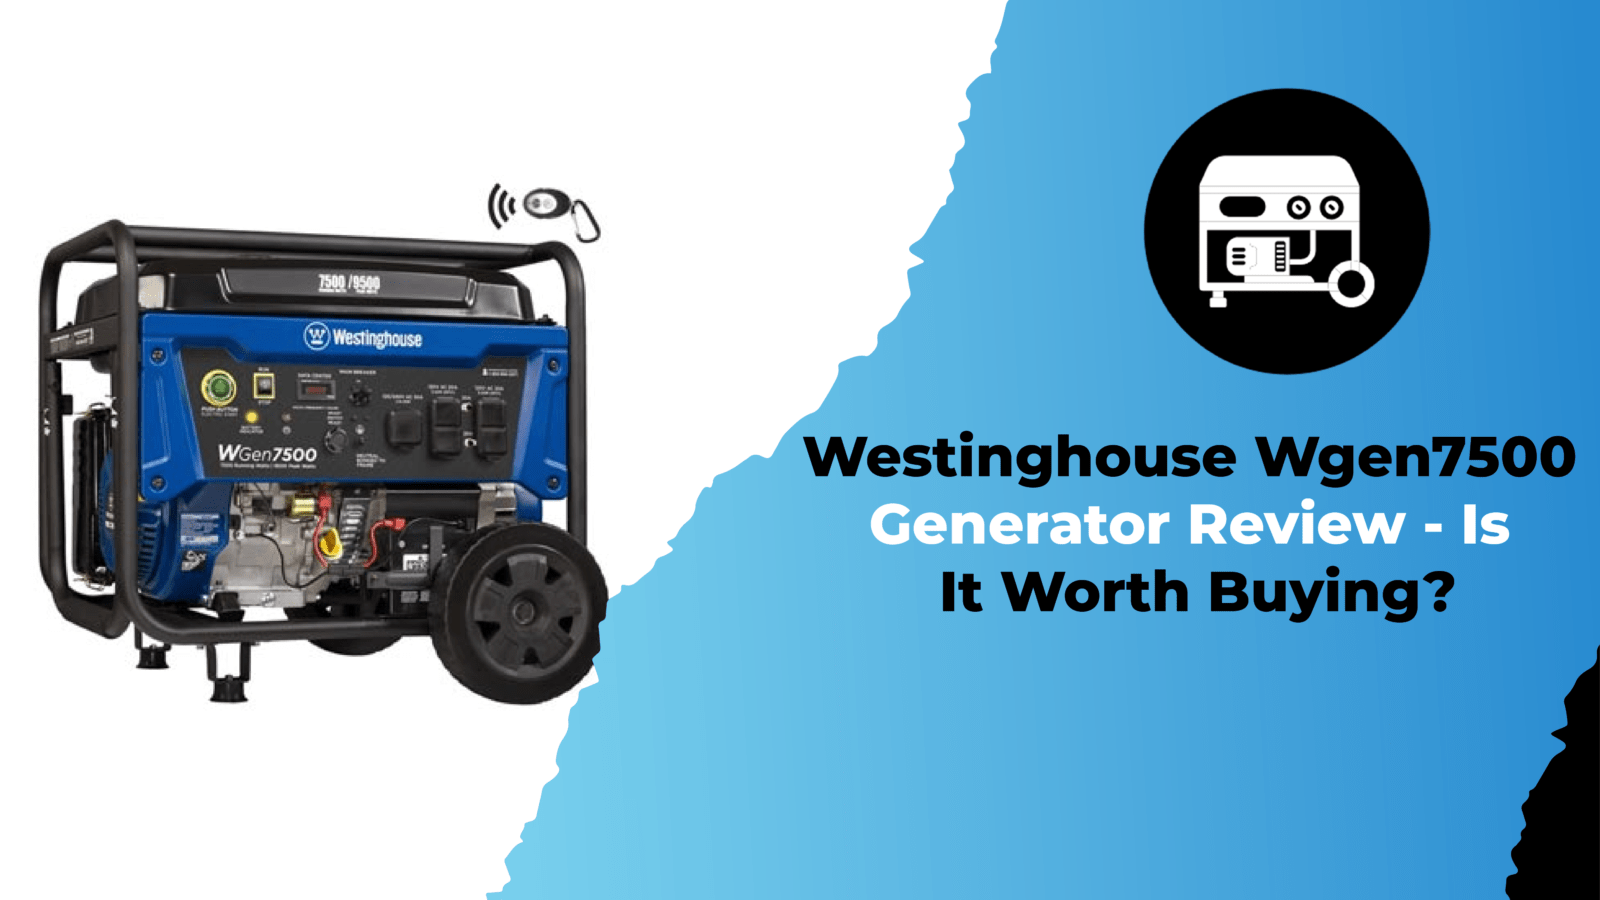 Westinghouse Wgen7500 Generator Review - Is It Worth Buying